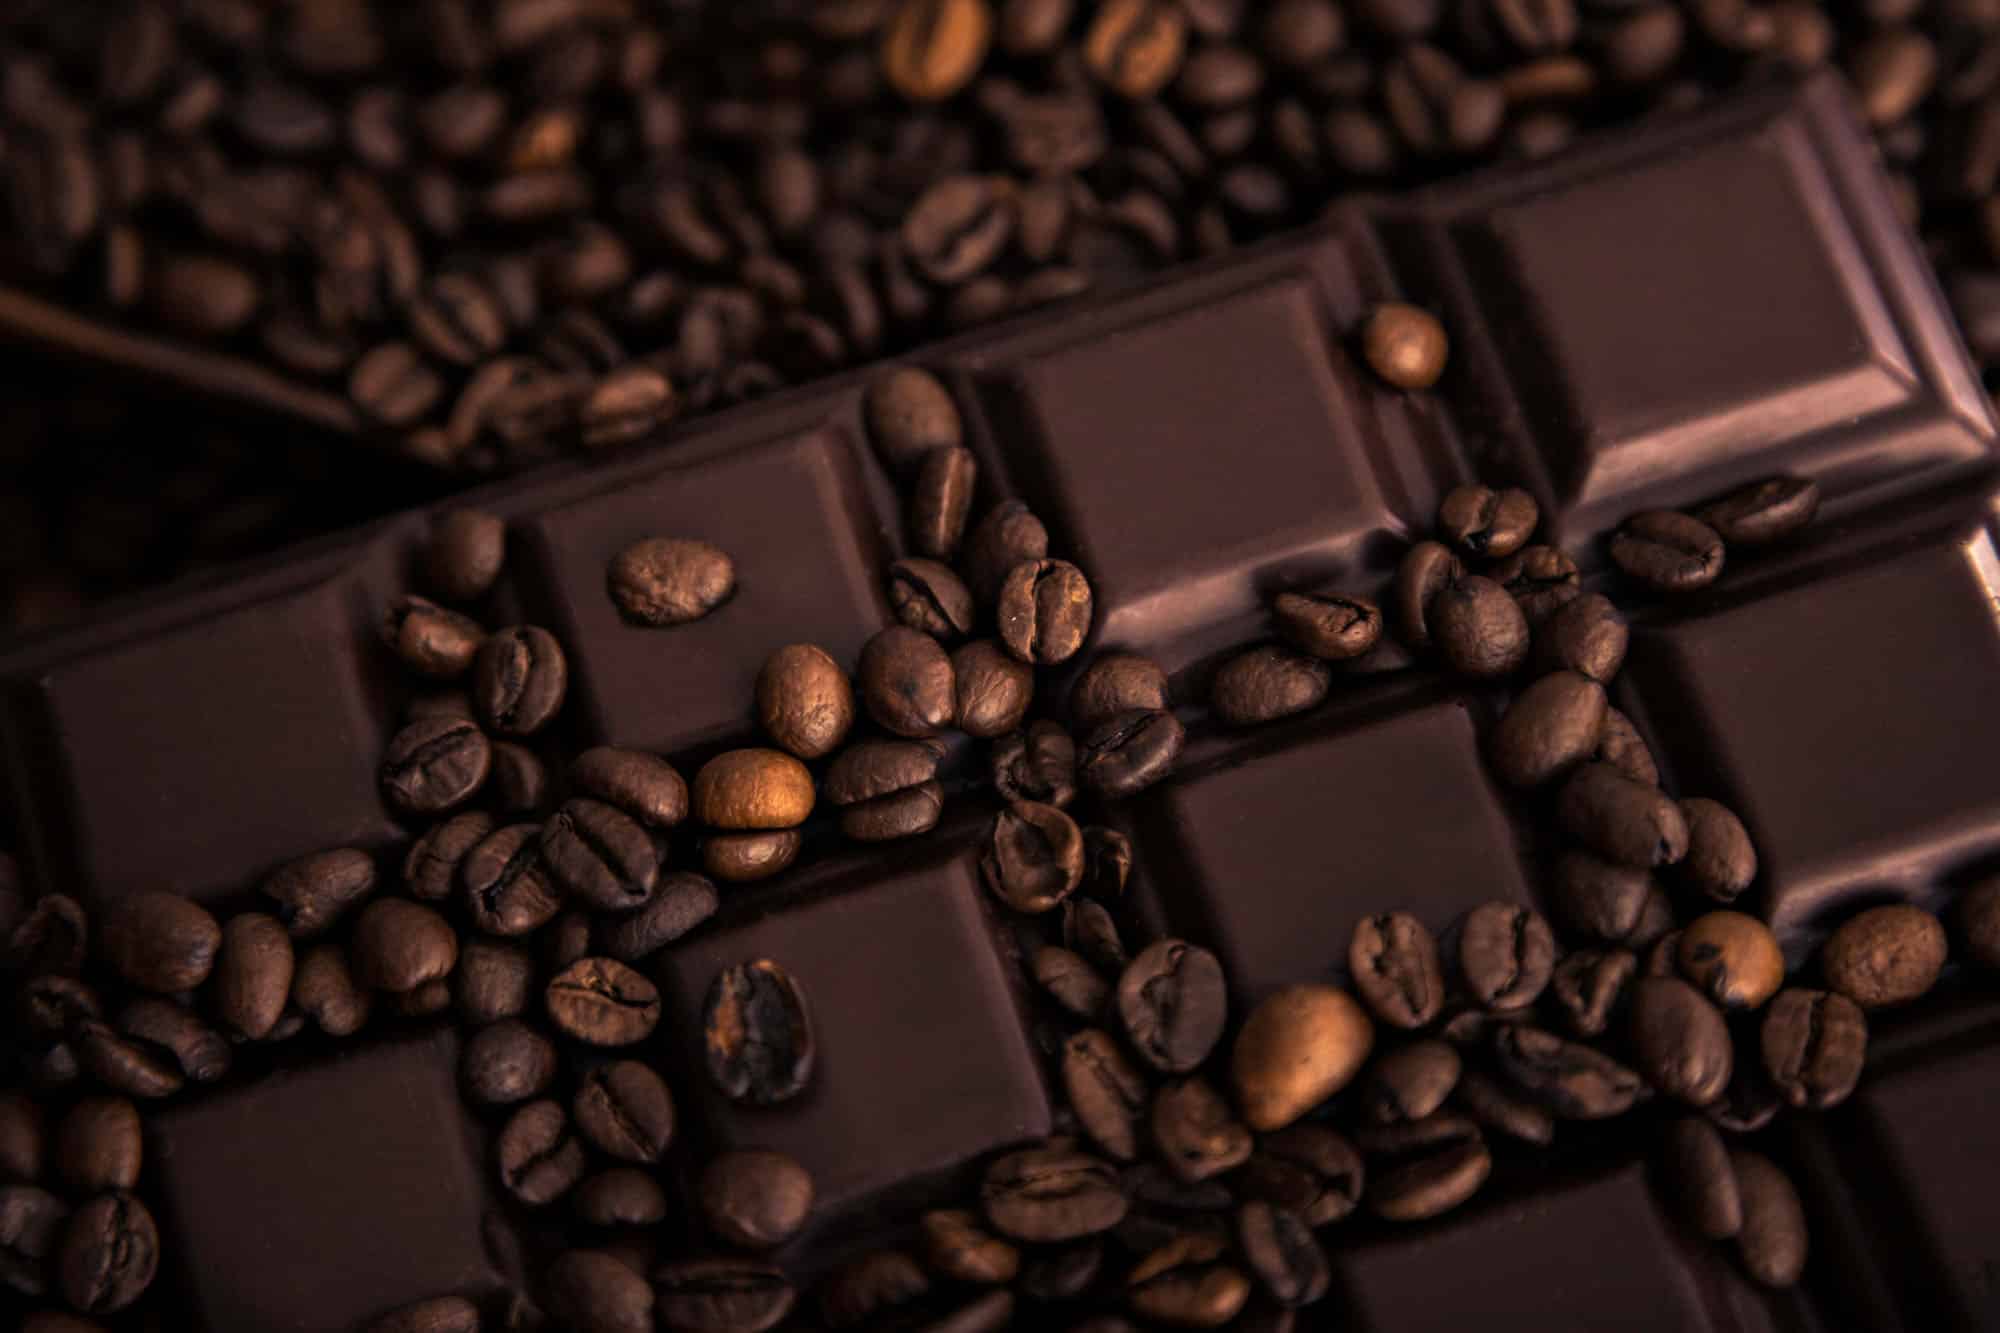 Roasted coffee beans and chocolate bar close-up.